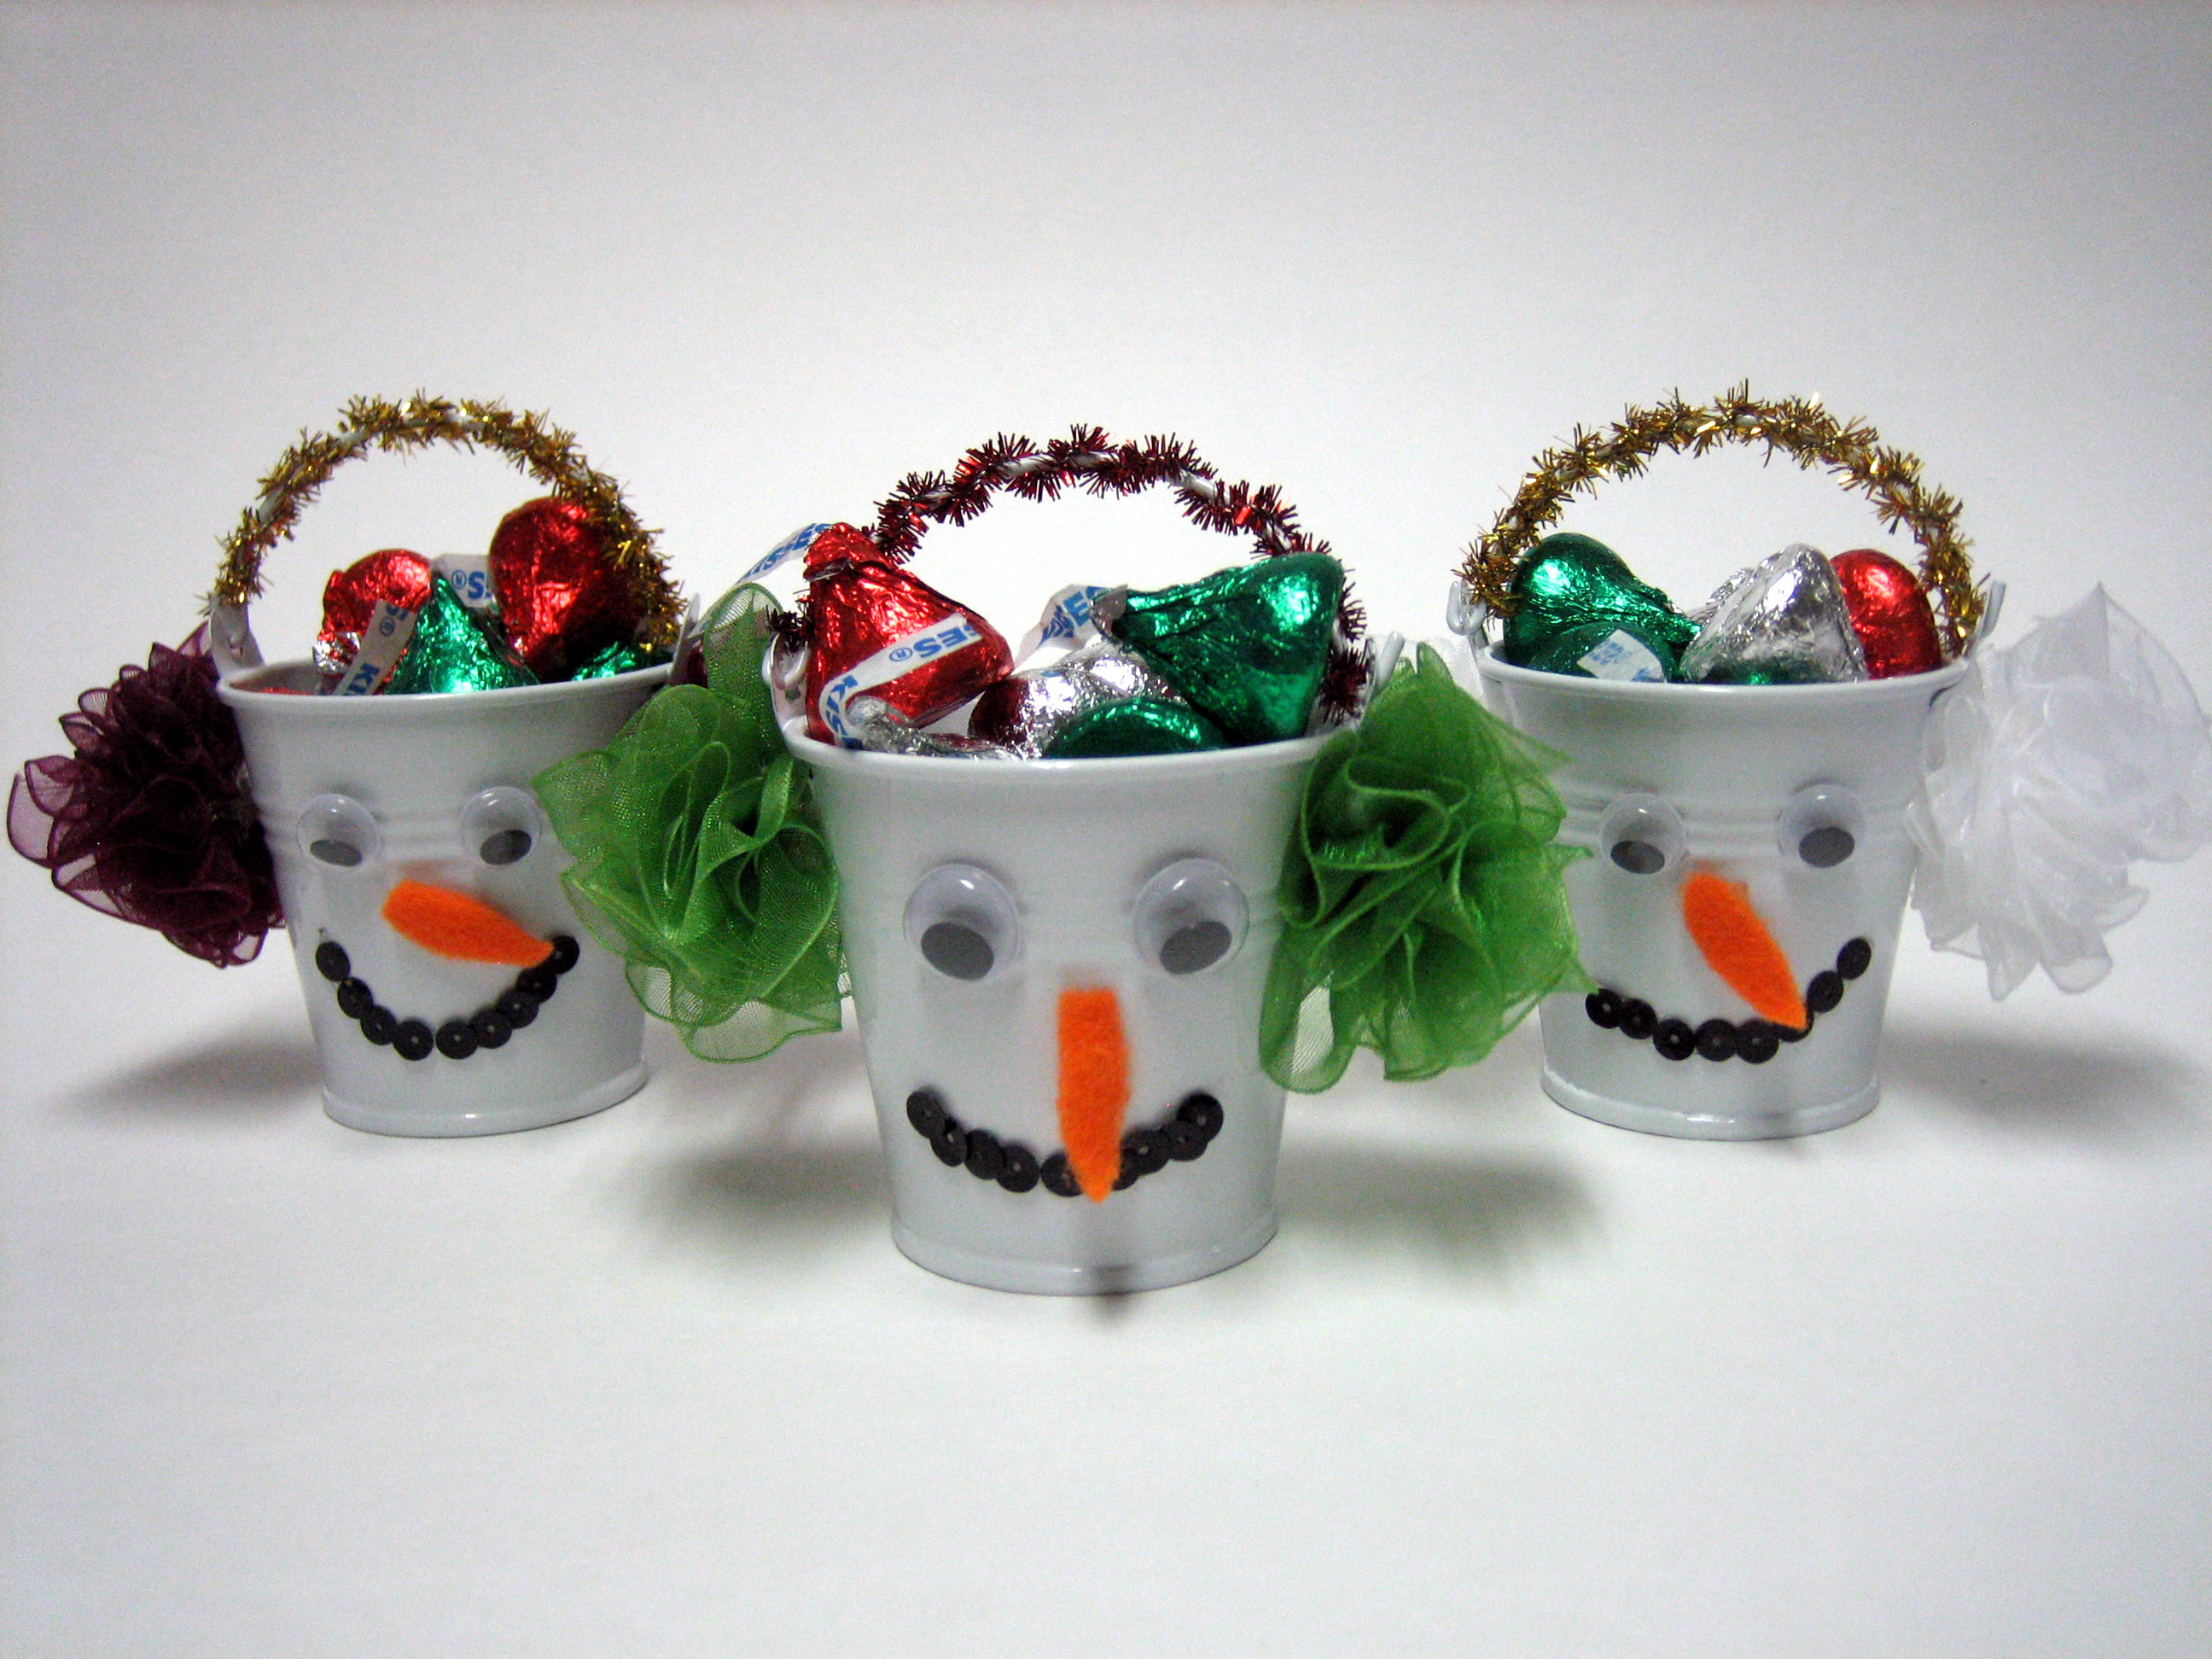 Snowman Favors - How to make favors with Bowdabra craft materials